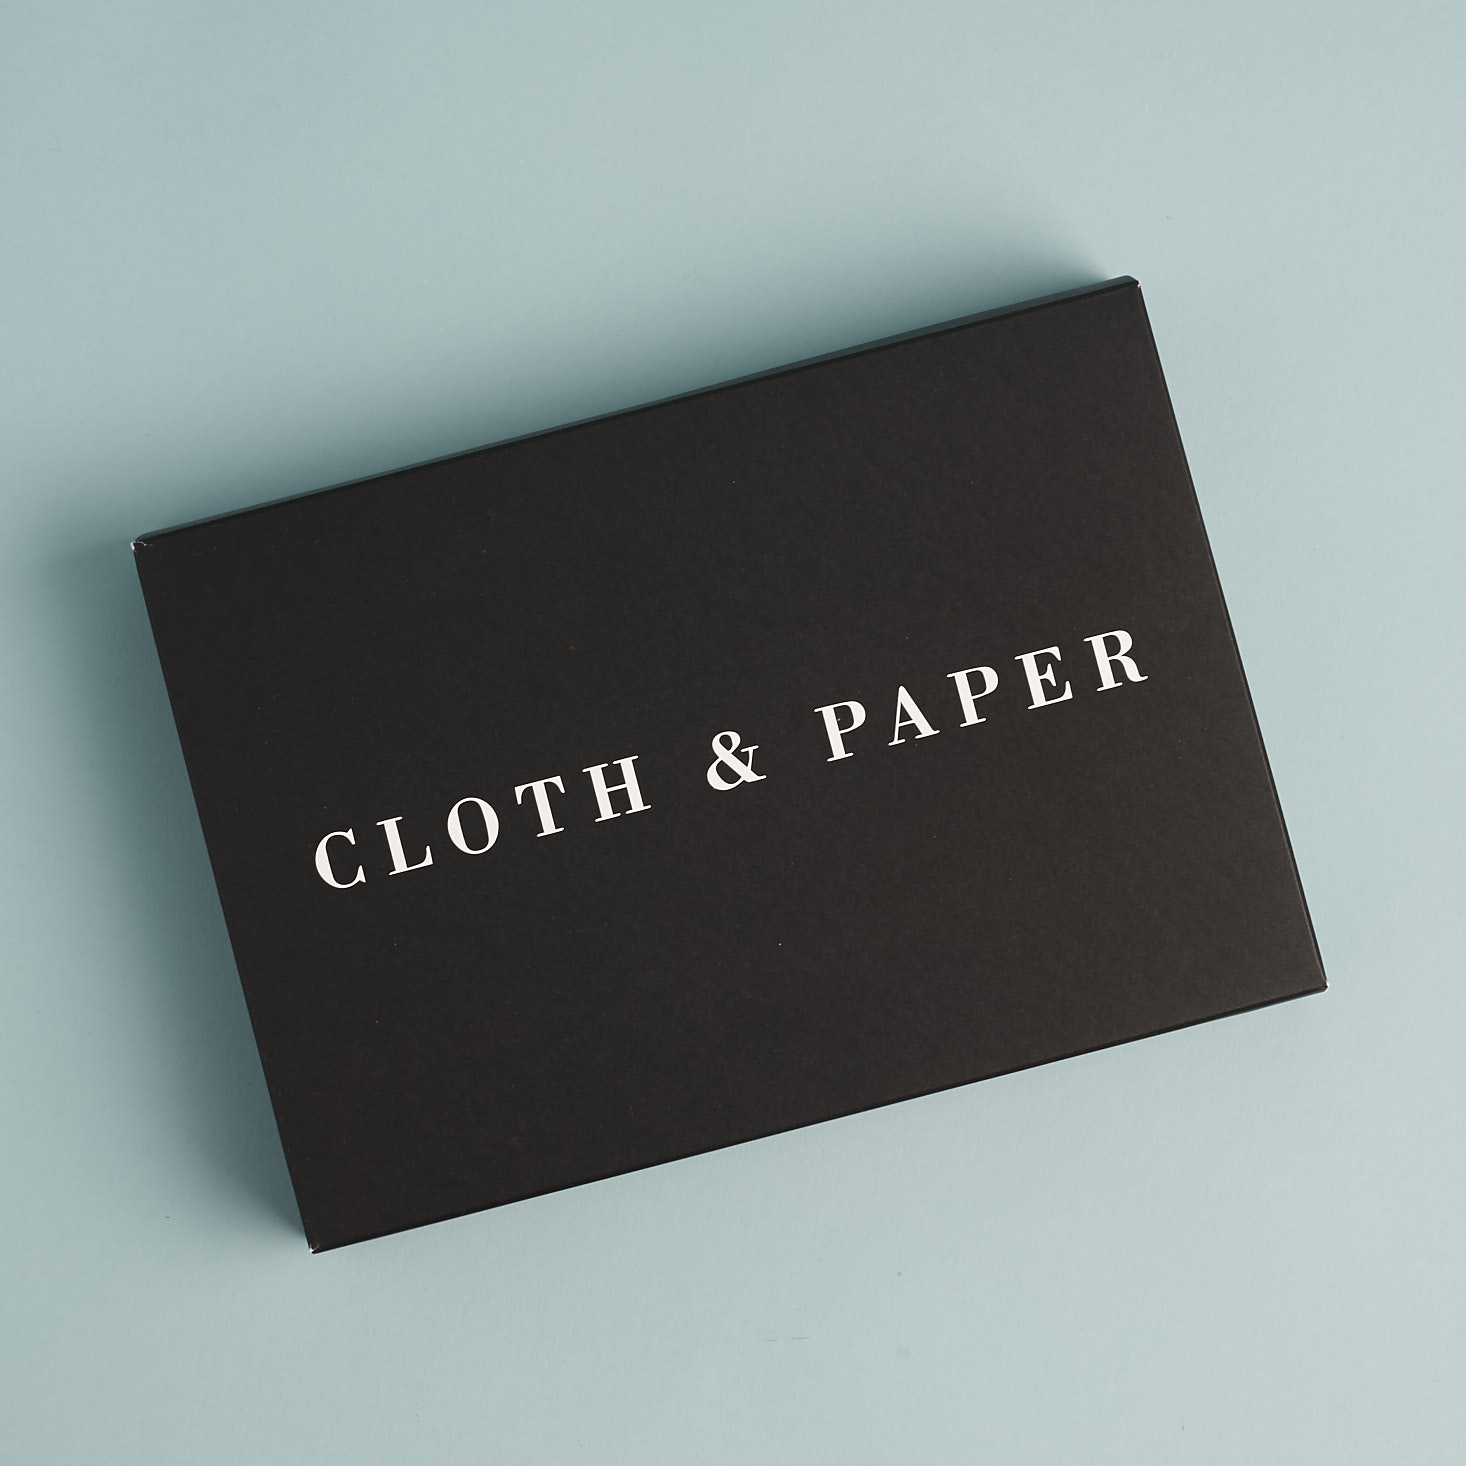 Cloth & Paper Stationery Subscription Review – January 2018